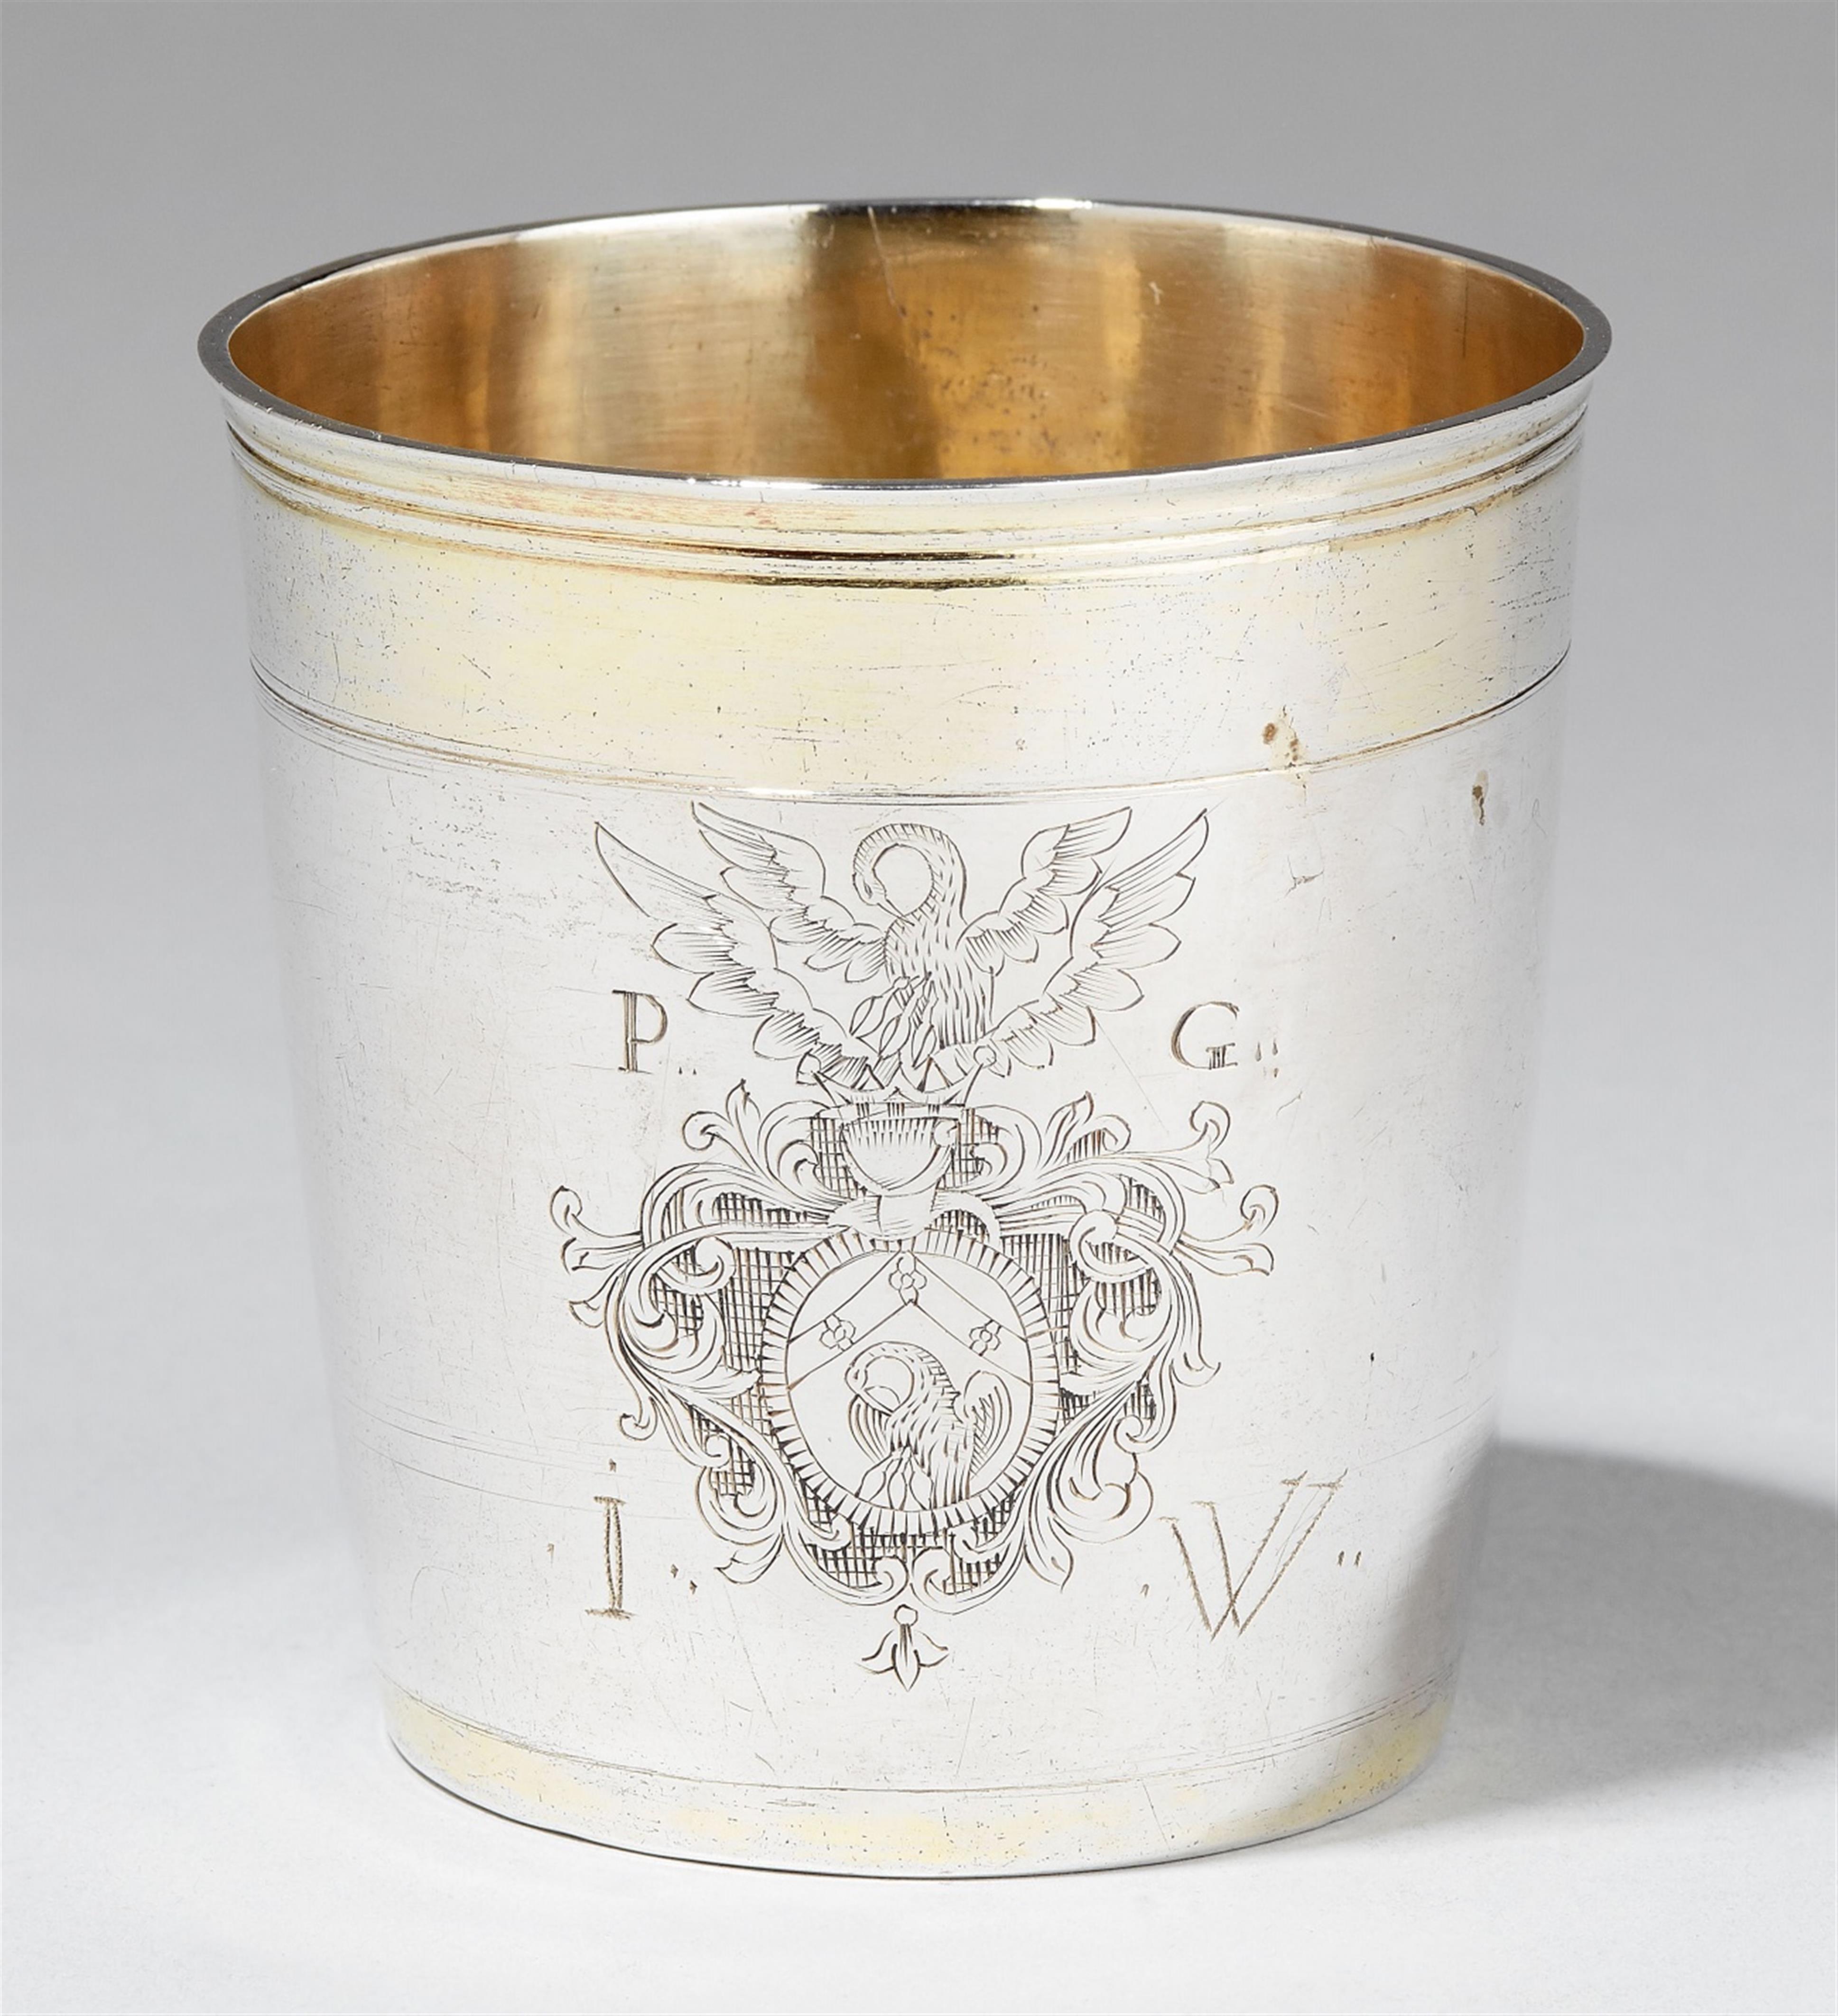 A Weilheim silver beaker. Monogrammed "P.G.I.W.". With remains of gilding. Marks of Master IAK, ca. 1700. - image-1